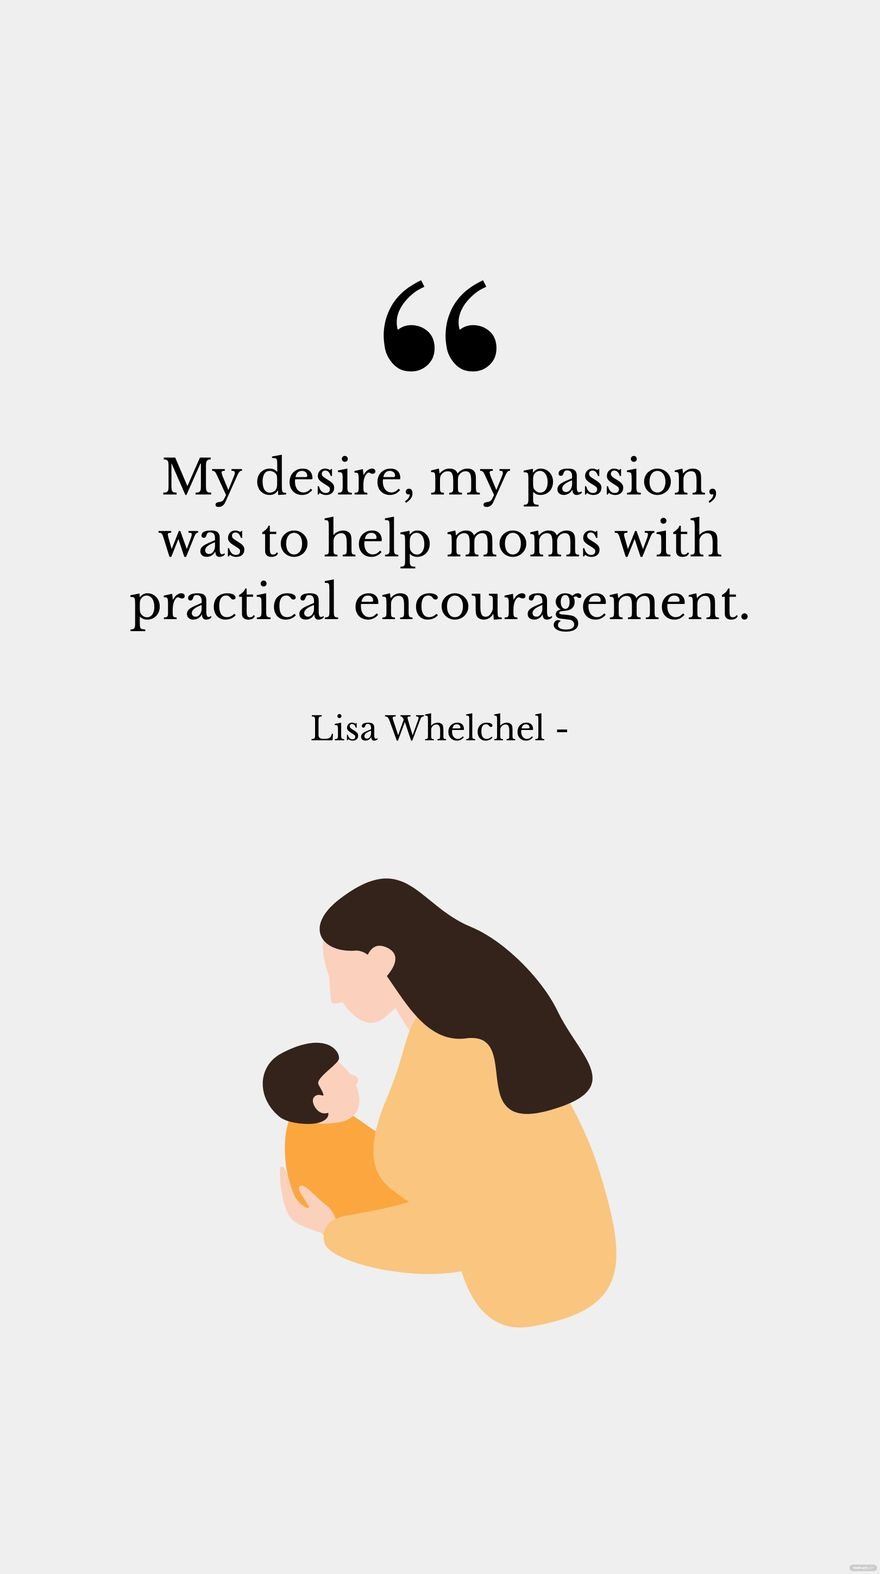 Lisa Whelchel - My desire, my passion, was to help moms with practical encouragement.